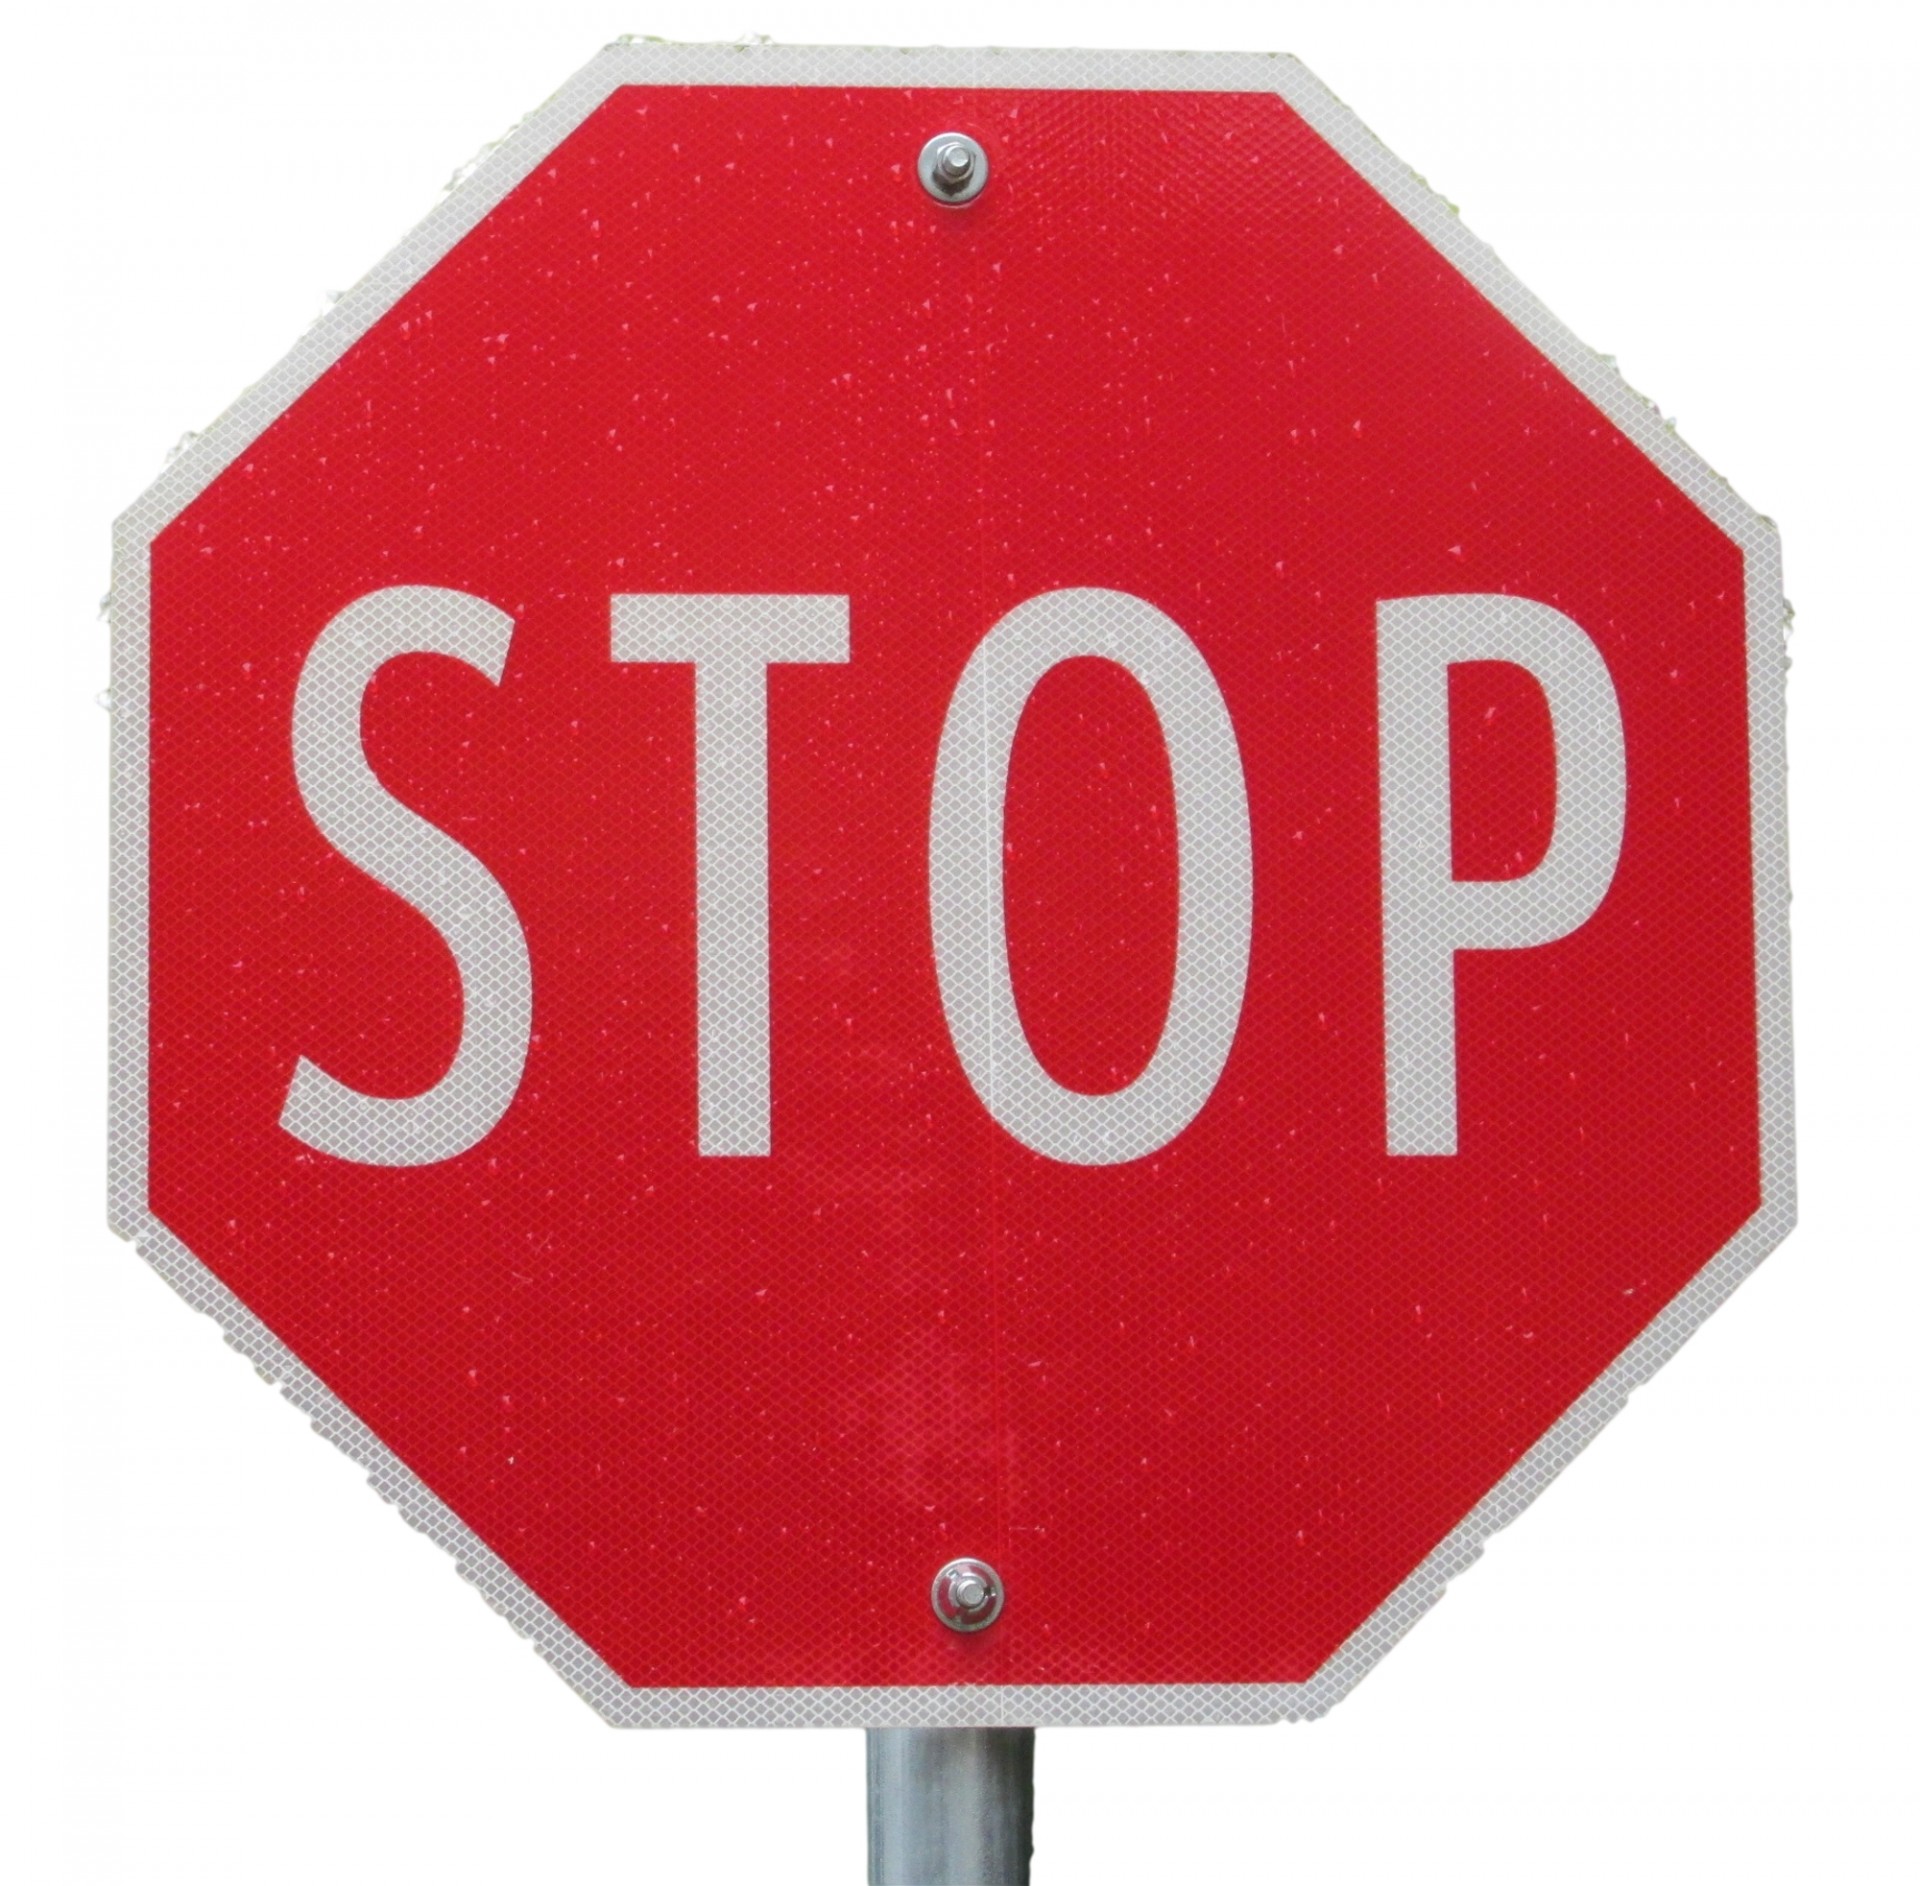 Traffic Stop Sign